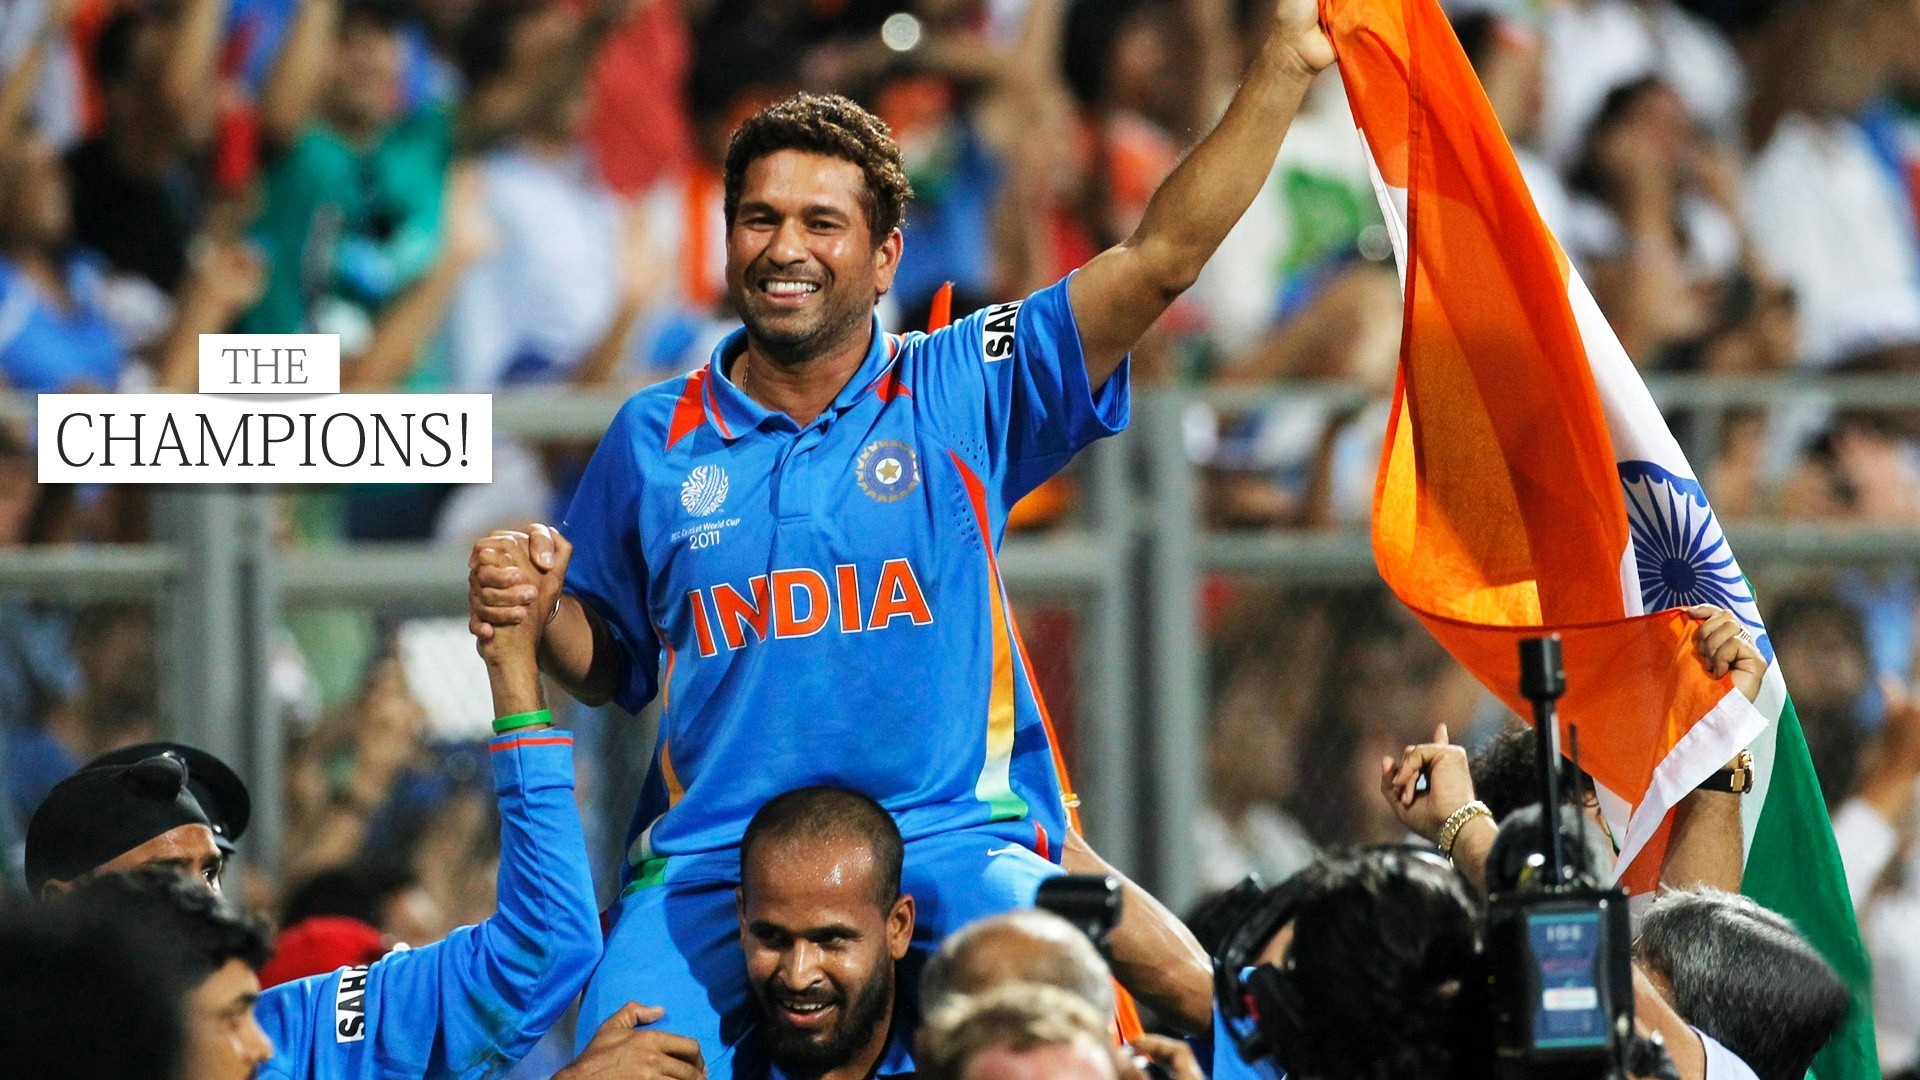 Winning Moment For Sachin In World Cup - 2011 Indian World Cup - HD Wallpaper 